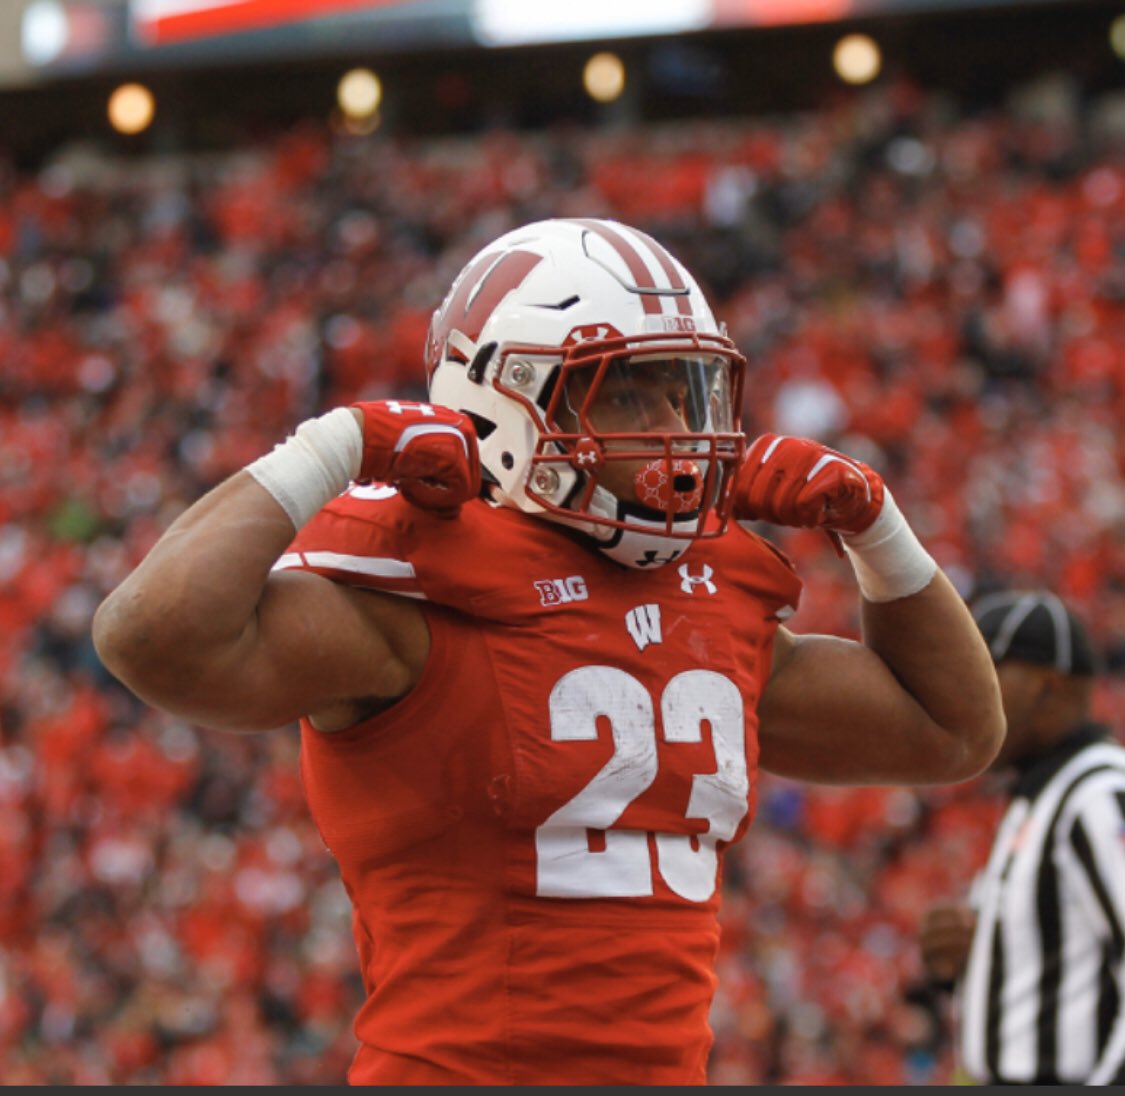 1 - Jonathan Taylor - 5’10” 226 - Wisconsin - 21.3 yrs old Ball security & receiving ability. Aside from those slight concerns, Taylor profiles as a truly elite RB. At 226 lbs he ran a sub 4.40 40. He also turned in three straight 2,000+ yard seasons at Wisconsin. I’m excited.